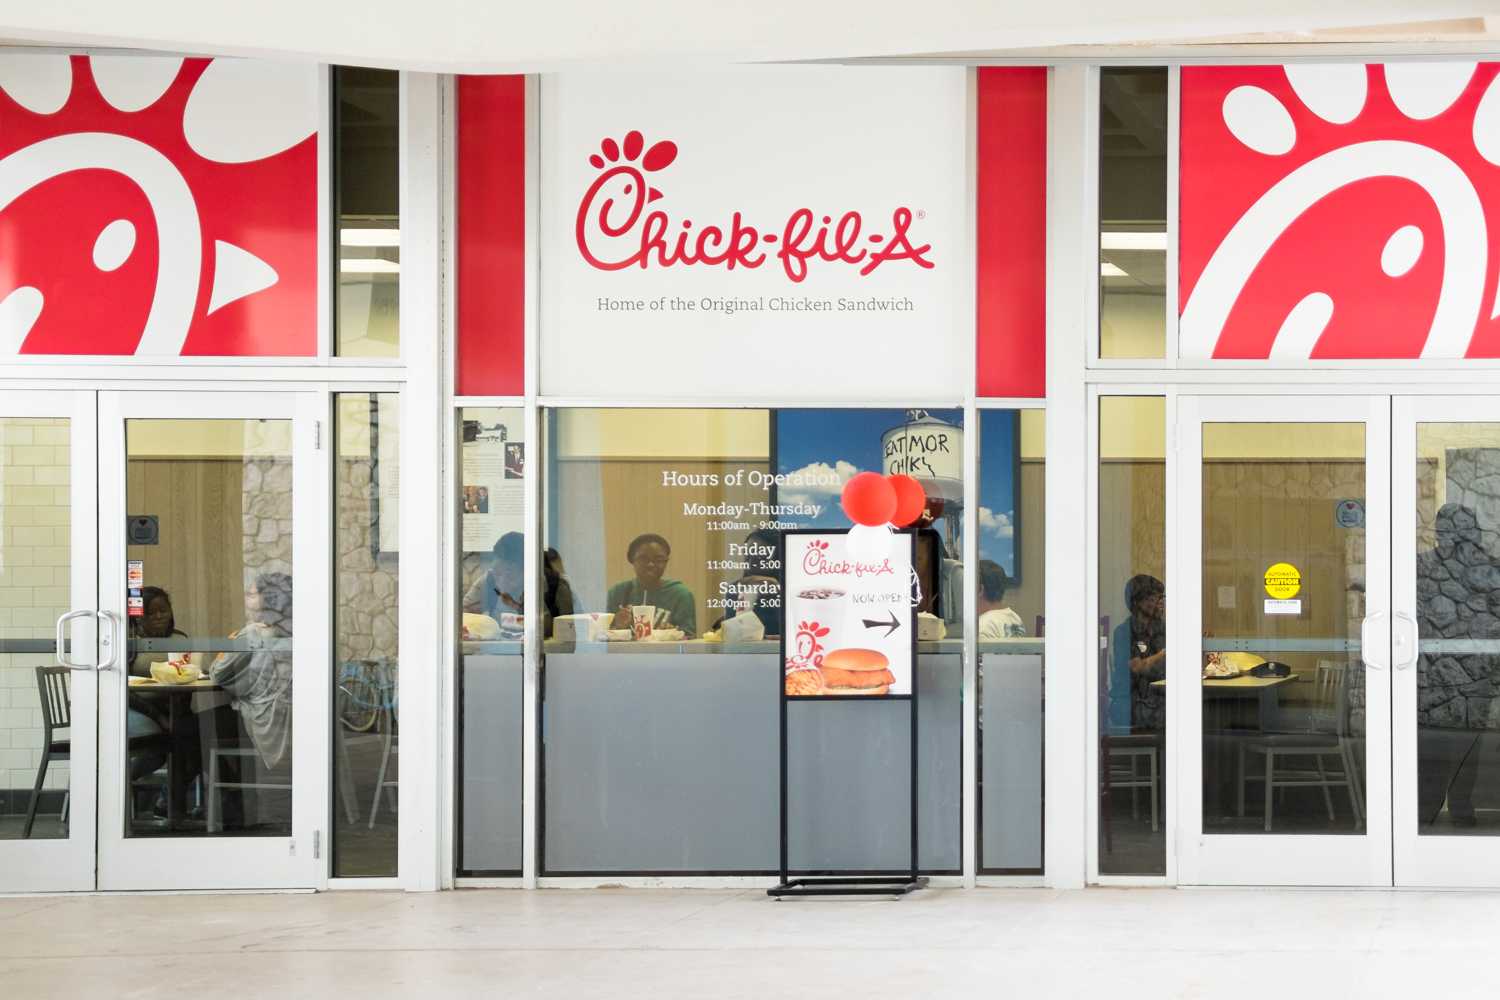 FAU's Chick-fil-A is now open. It is located next to FAU's Library. Mohammed F Emran | Web Editor